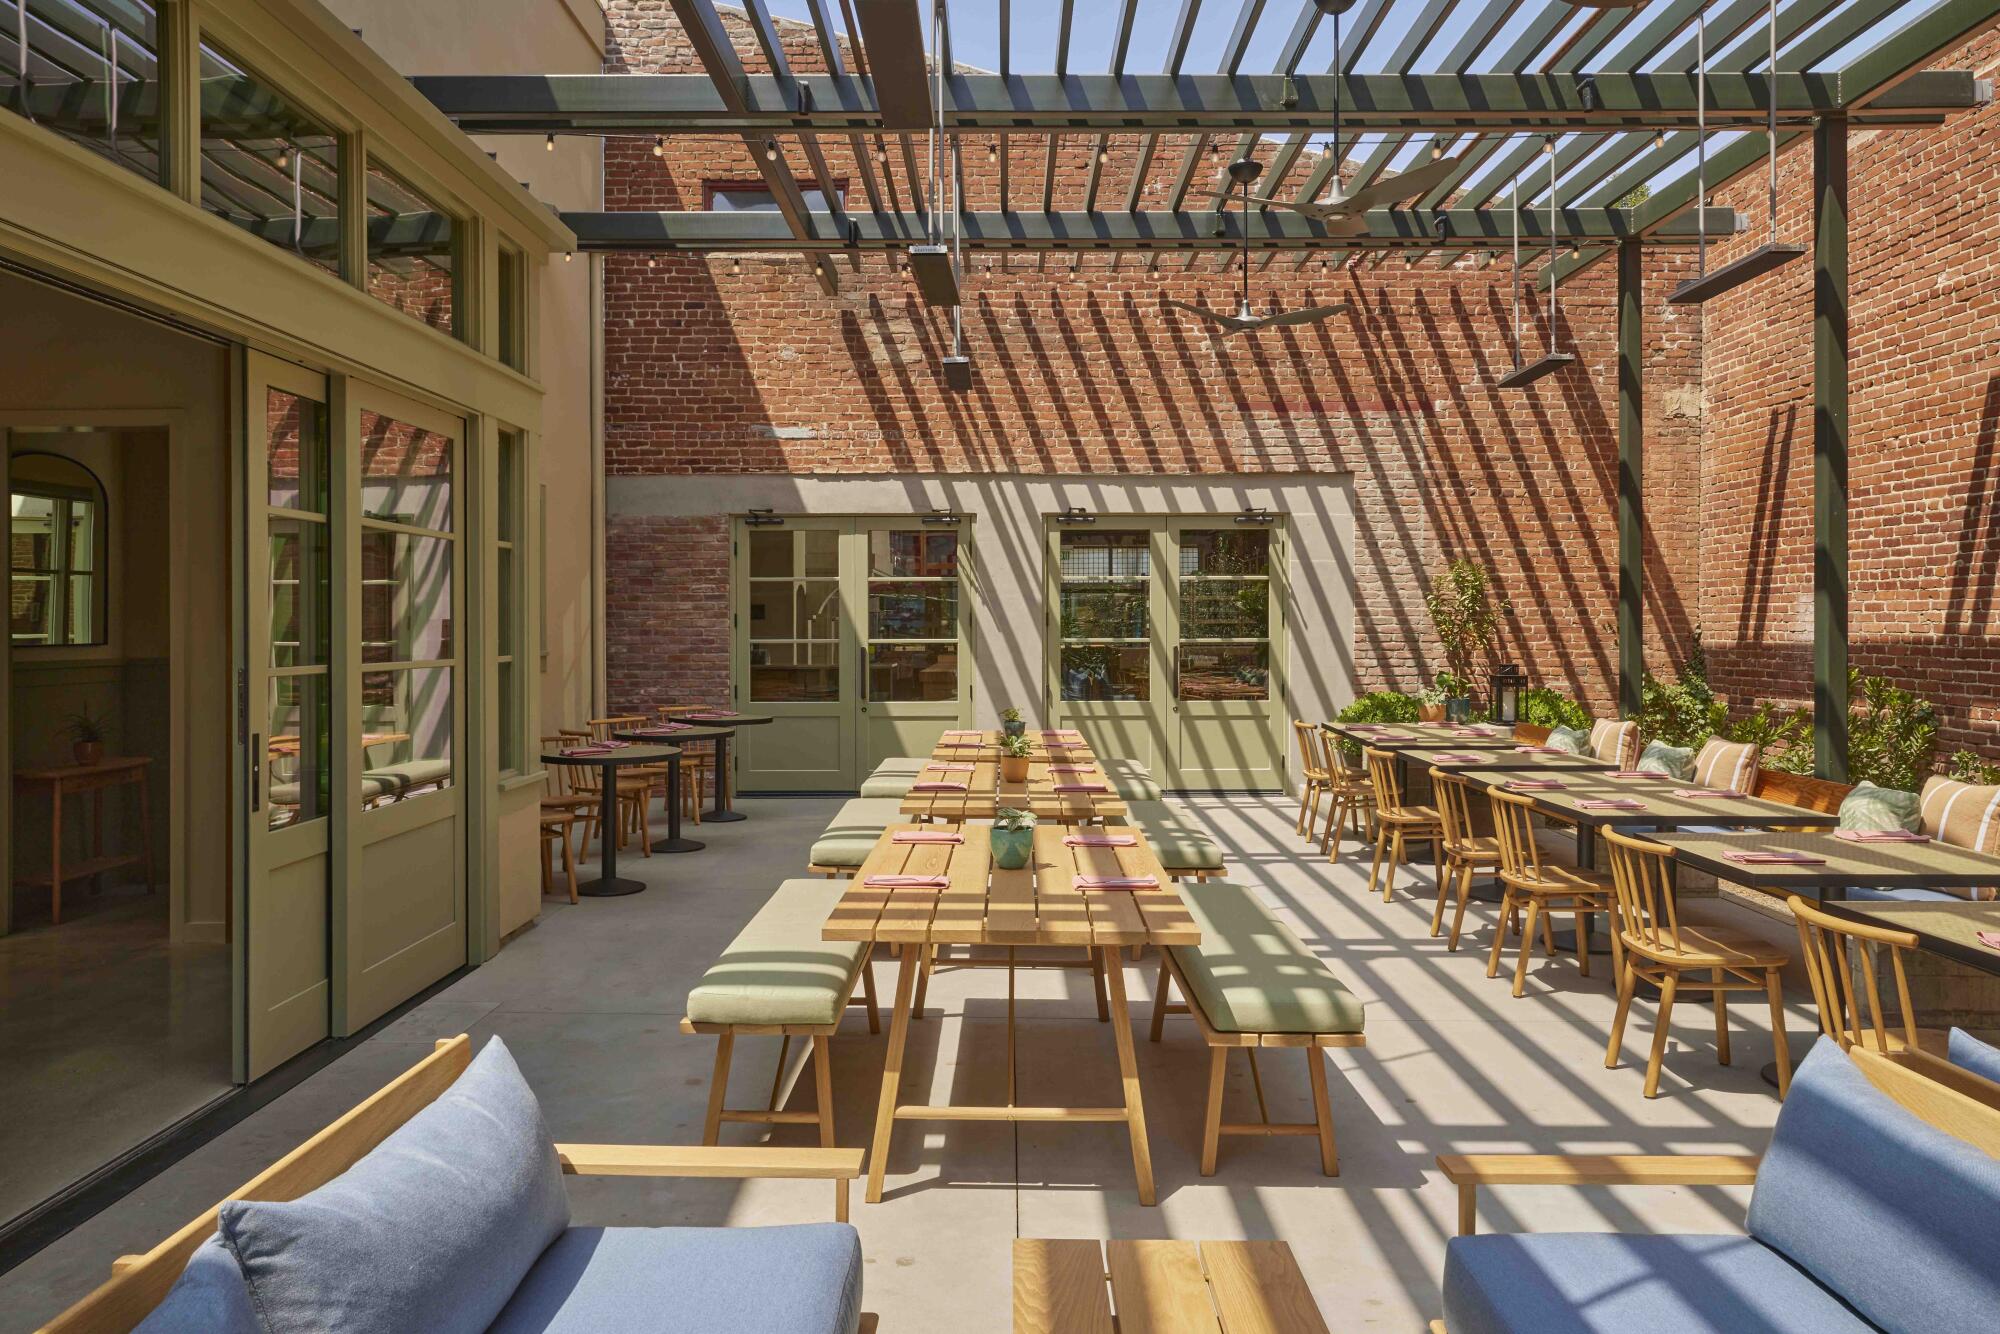 A view of a sunny dining patio features picnic tables under a steel trellis